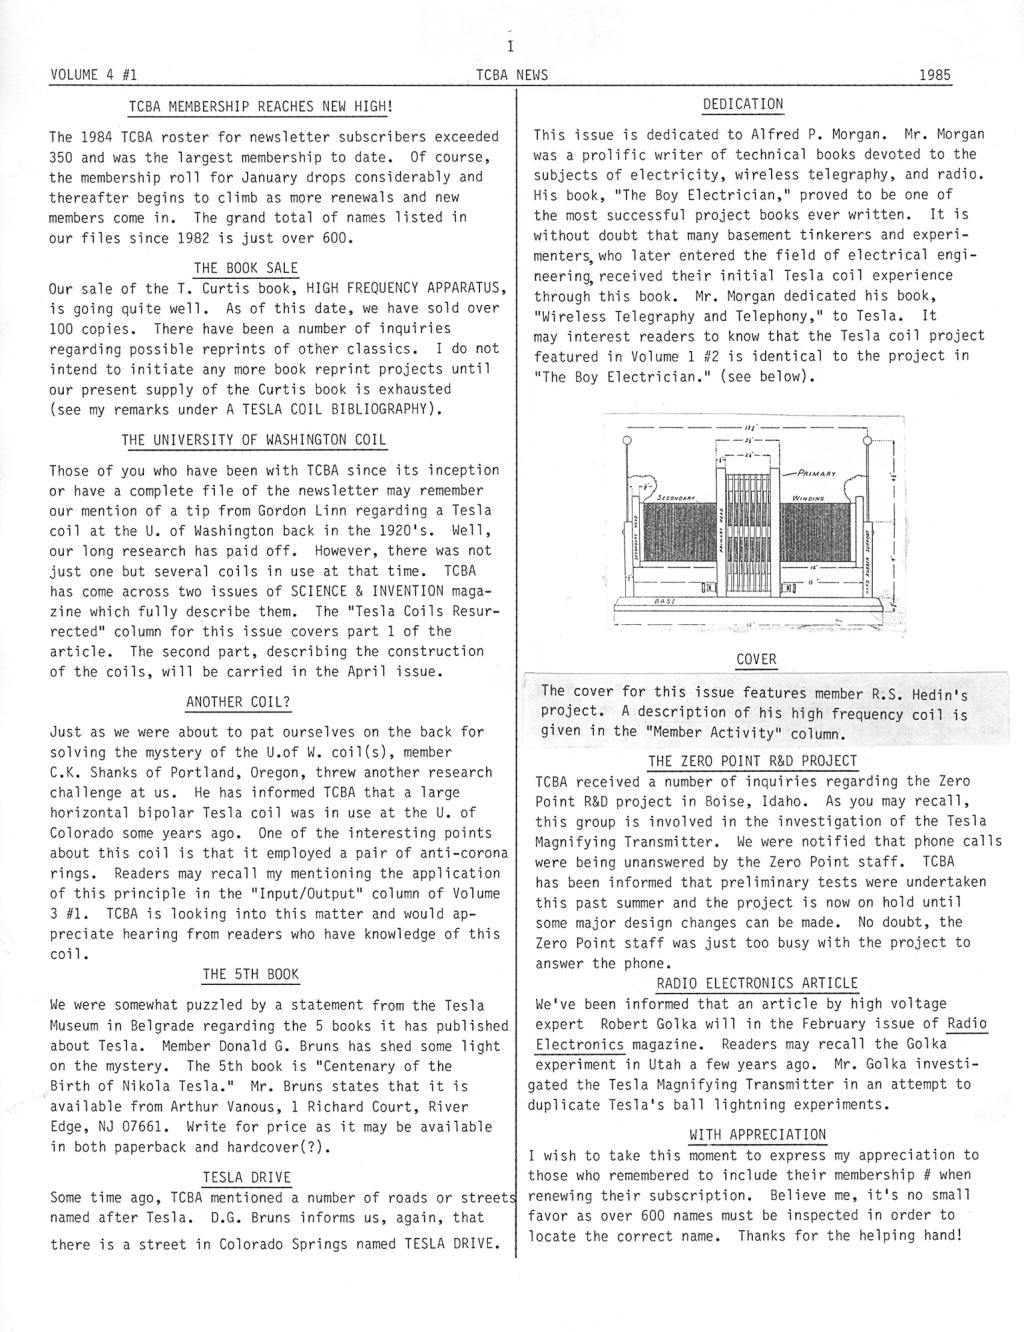 TCBA Volume 4 - Issue 1 - Page 1 of 18